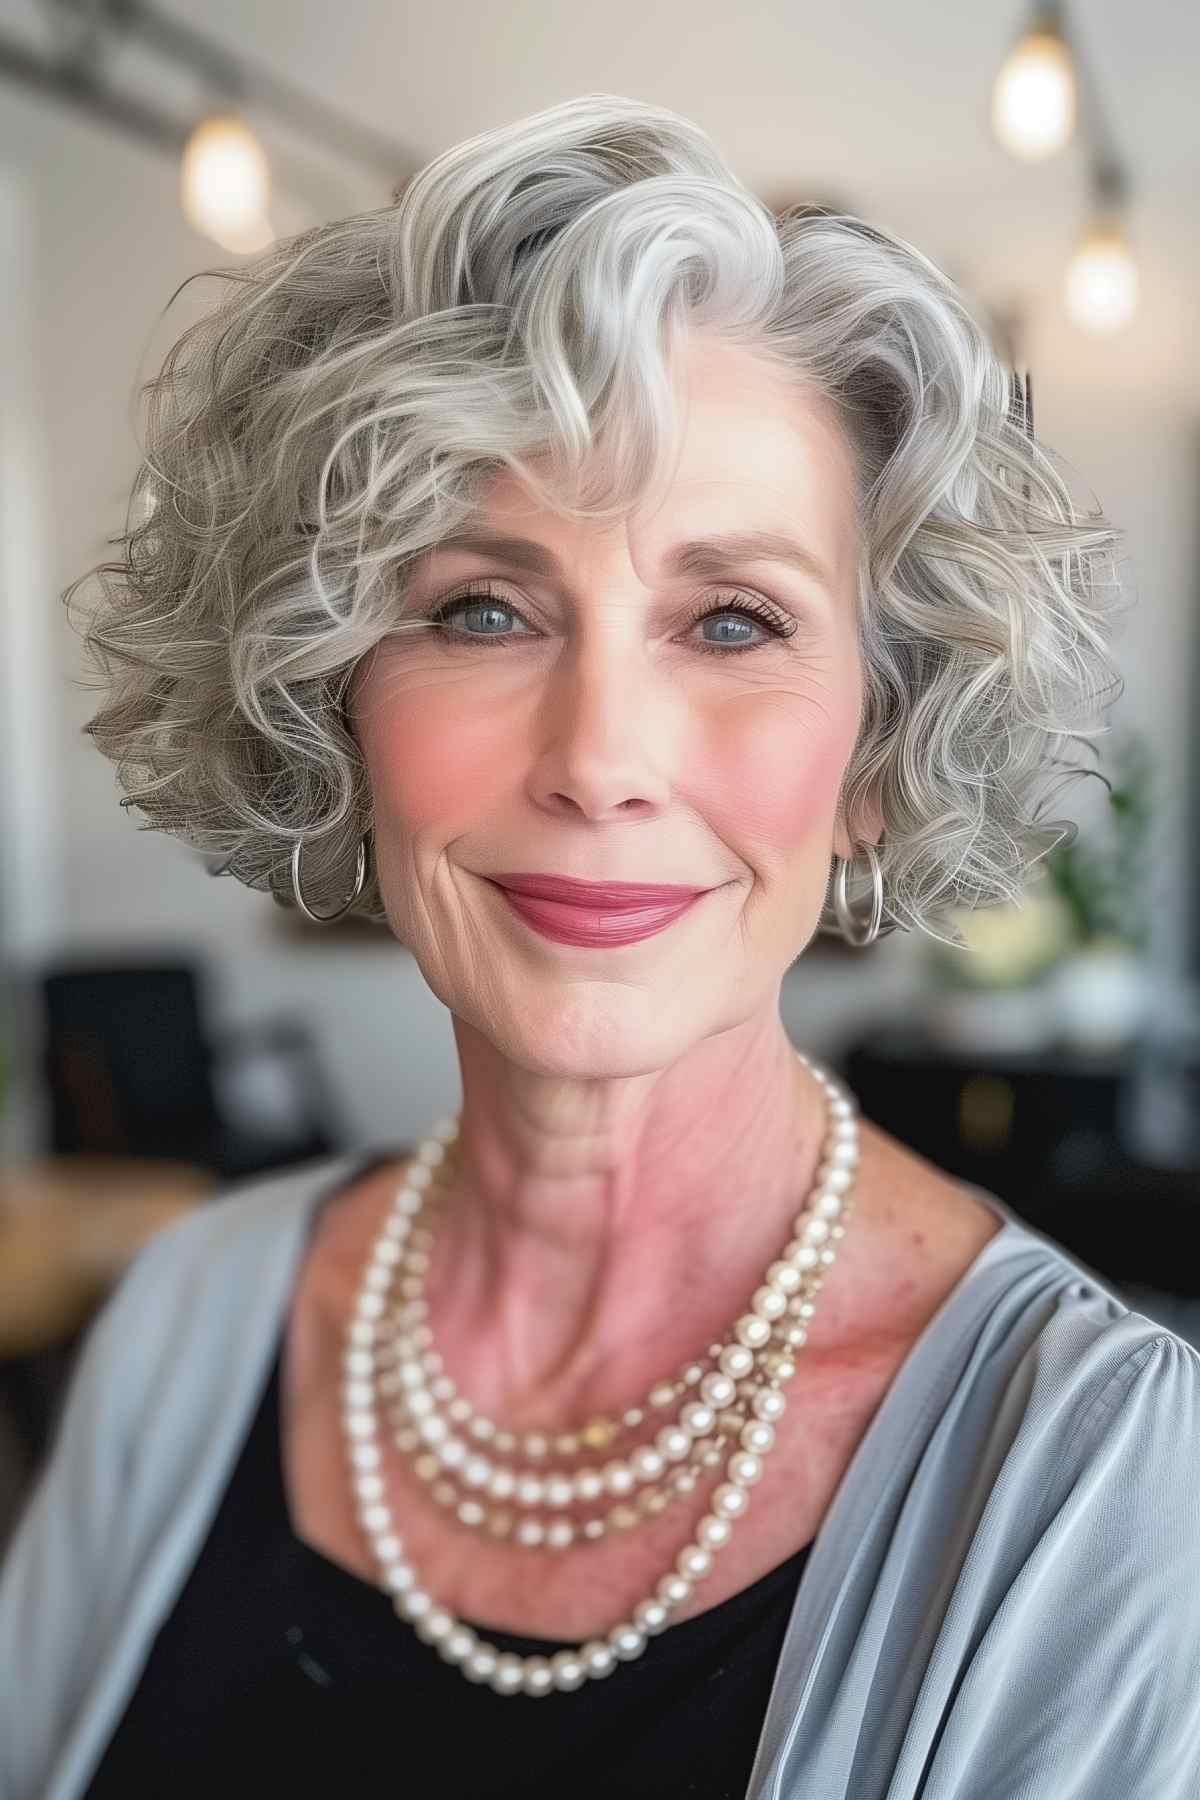 Layered bob for curly hair in silver-gray tones on a woman over 50, styled to enhance volume and natural texture.